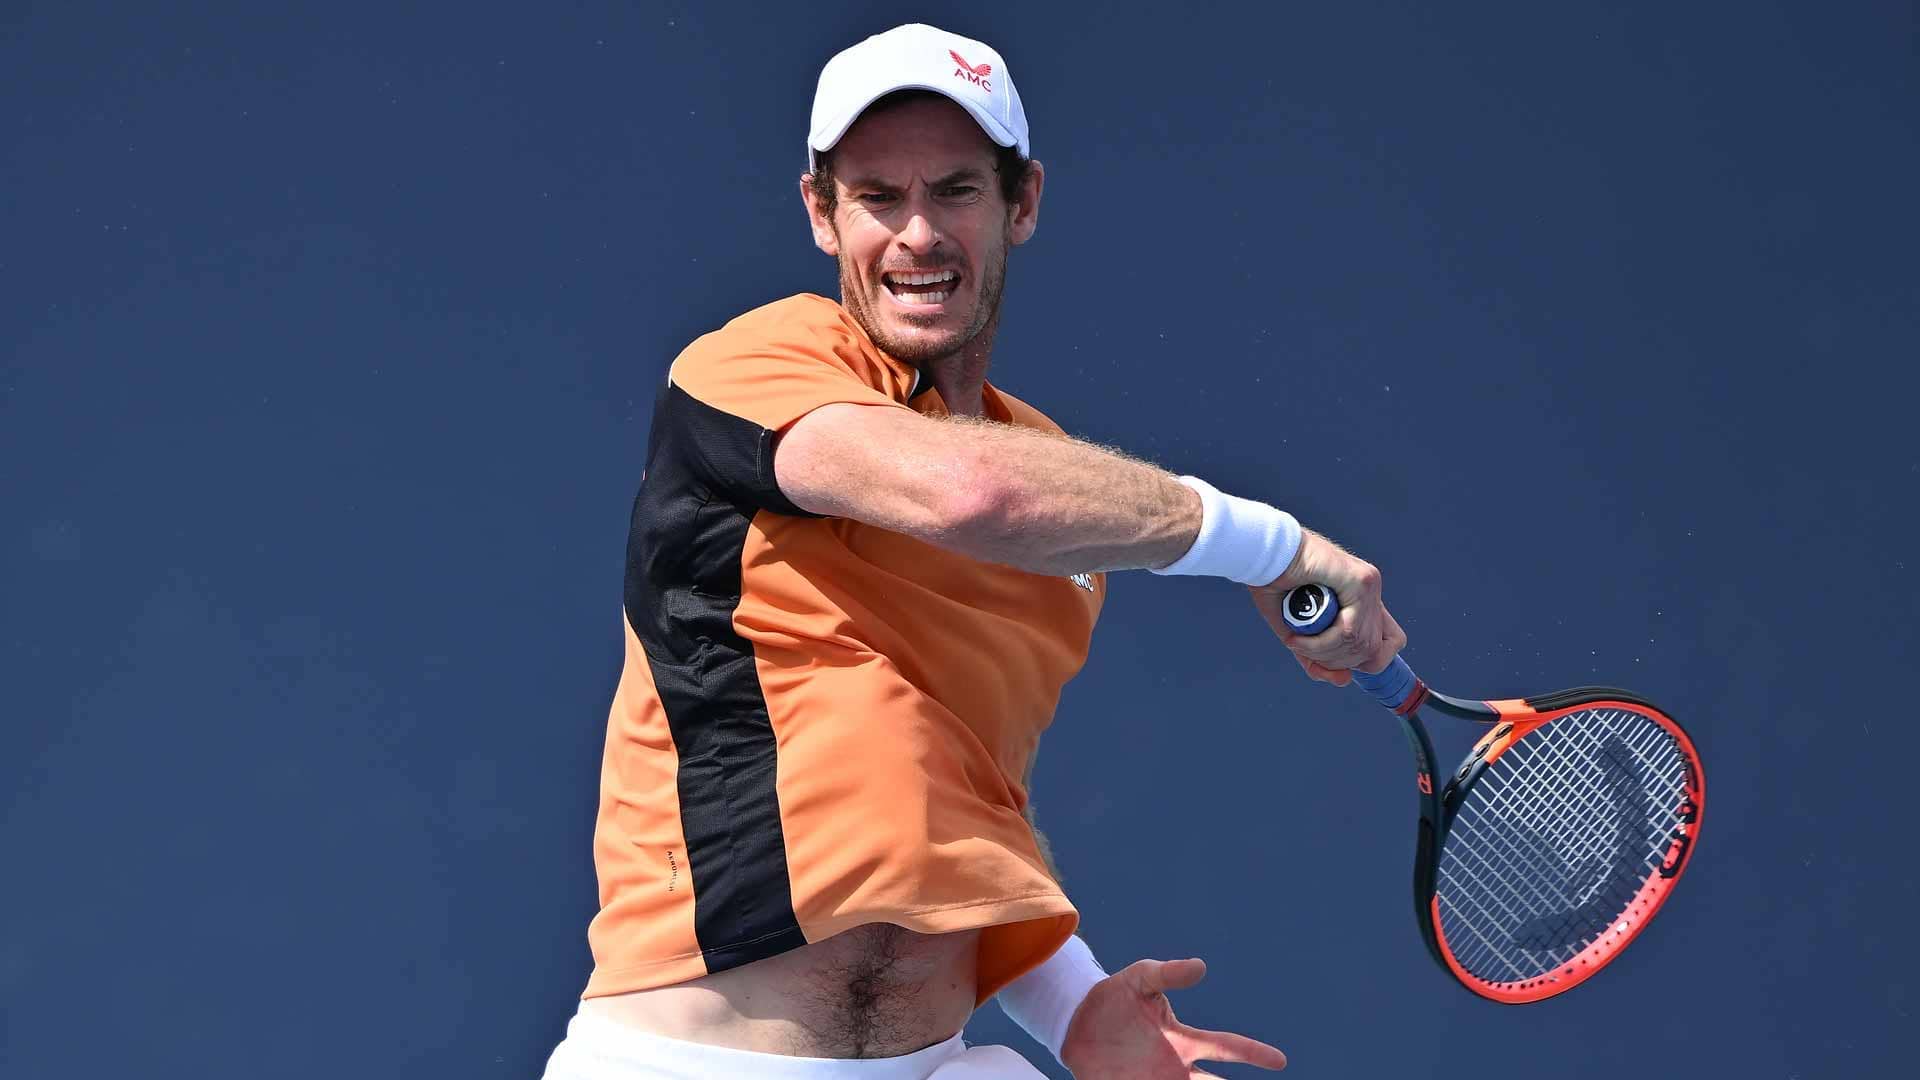 Andy Murray is set to make his Geneva debut.